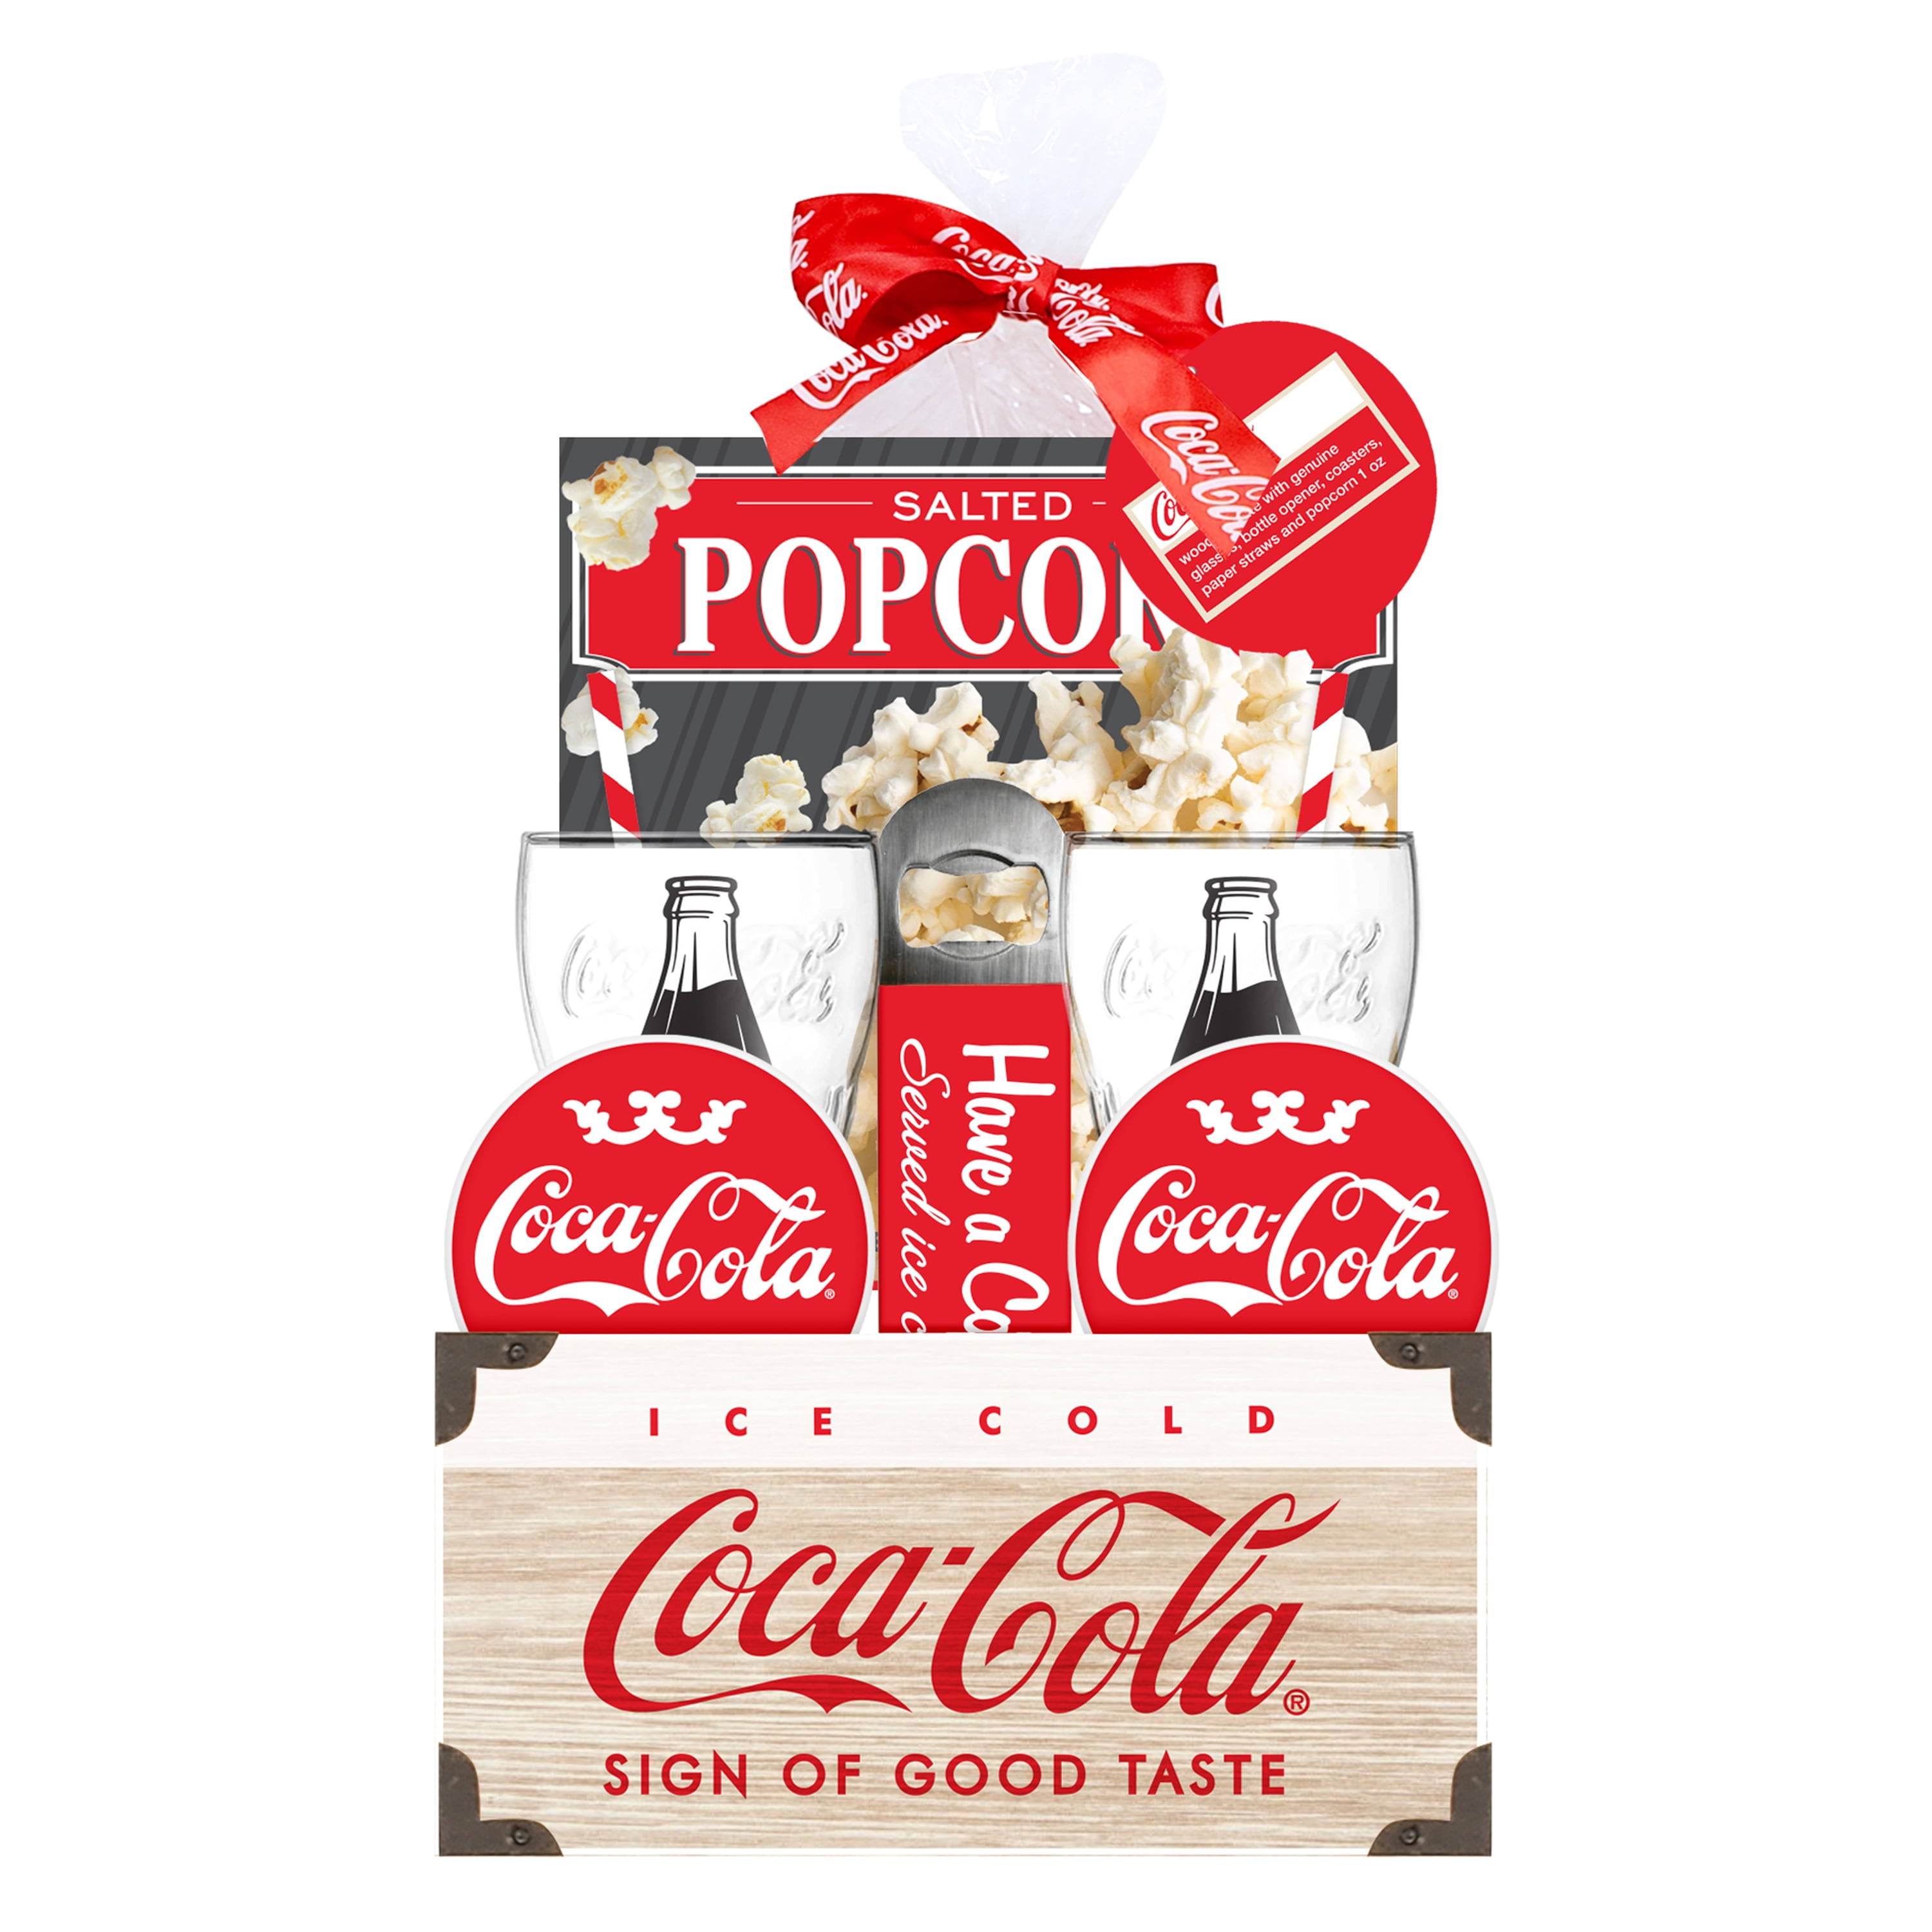 Coca-Cola Coca Cola Wooden Crate with Glasses, Bottle Opener, Coasters, and Popcorn